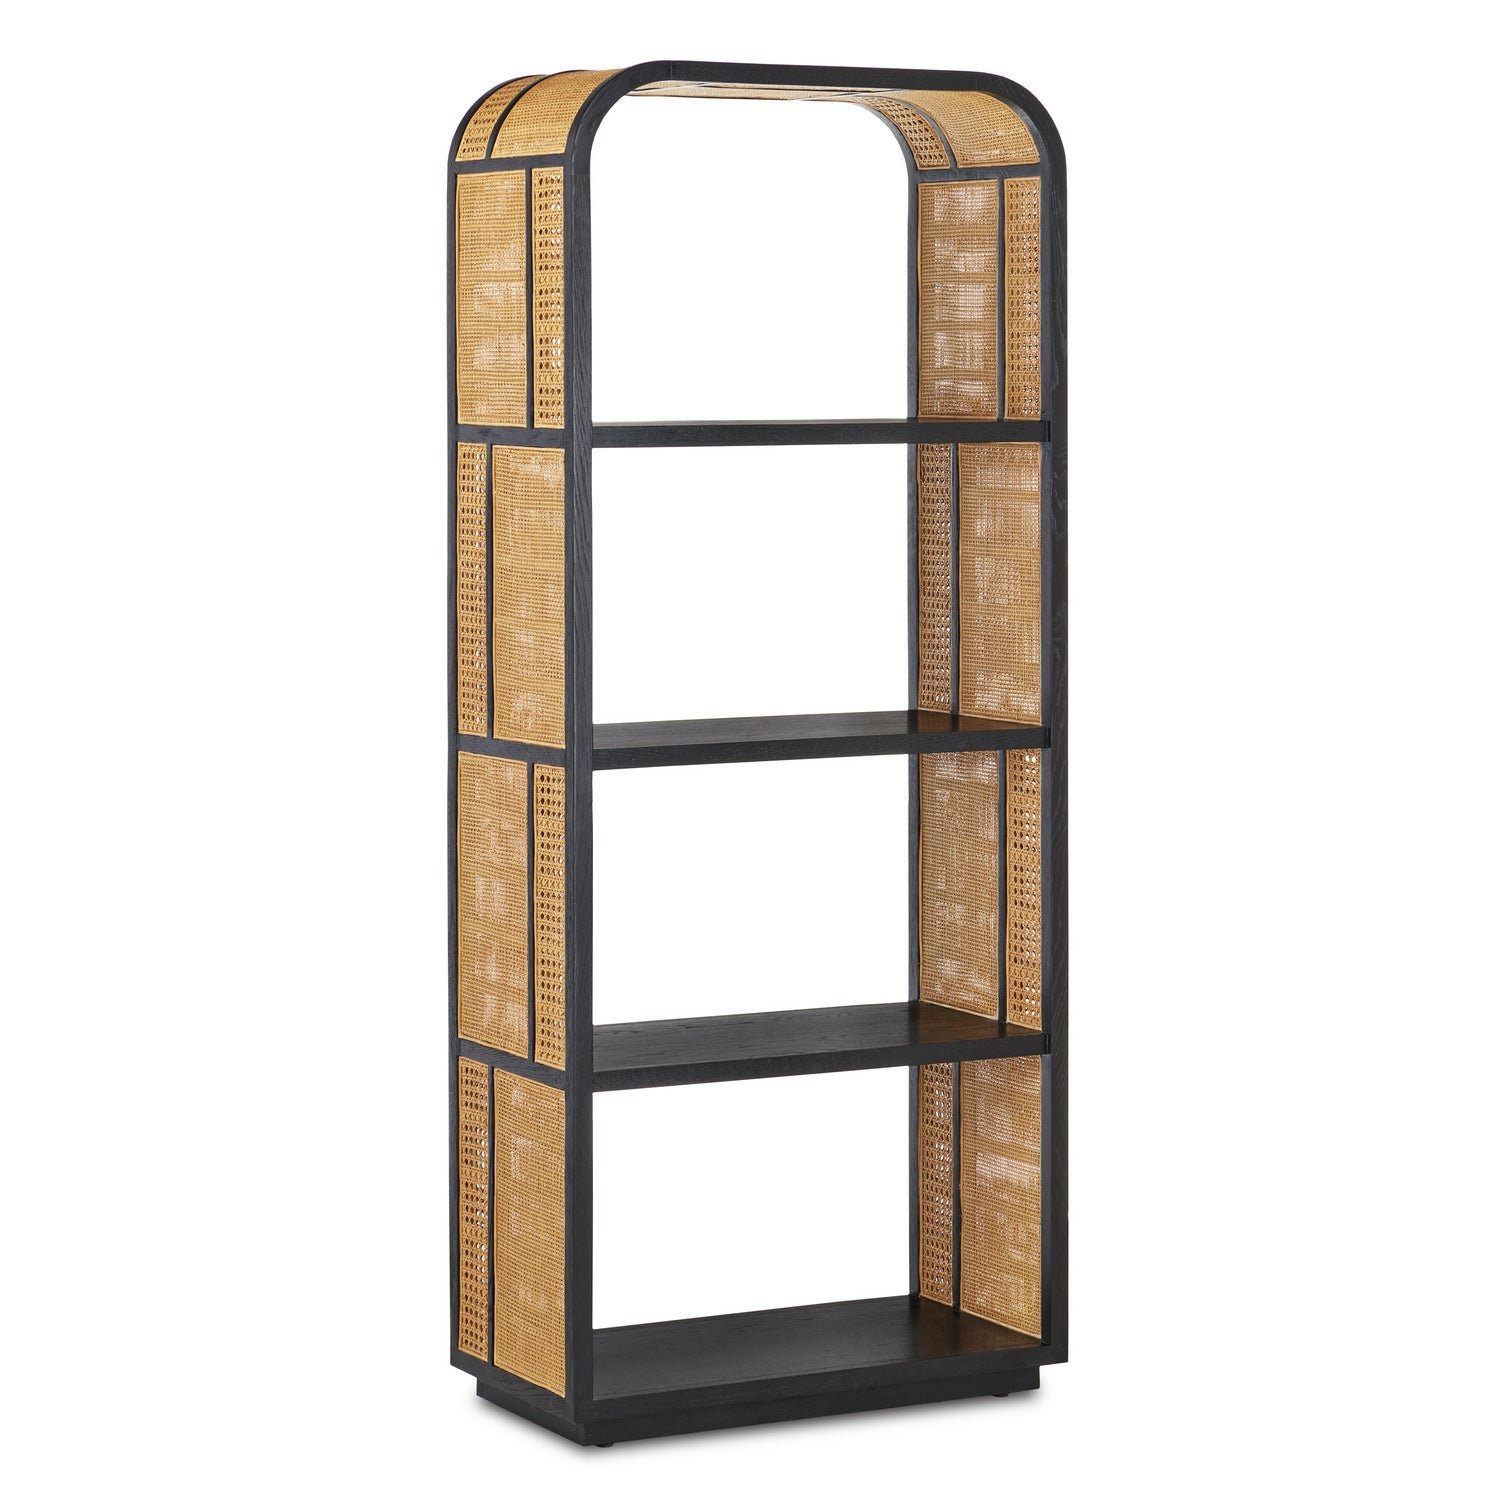 Etagere from the Anisa collection in Caviar Black/Natural finish